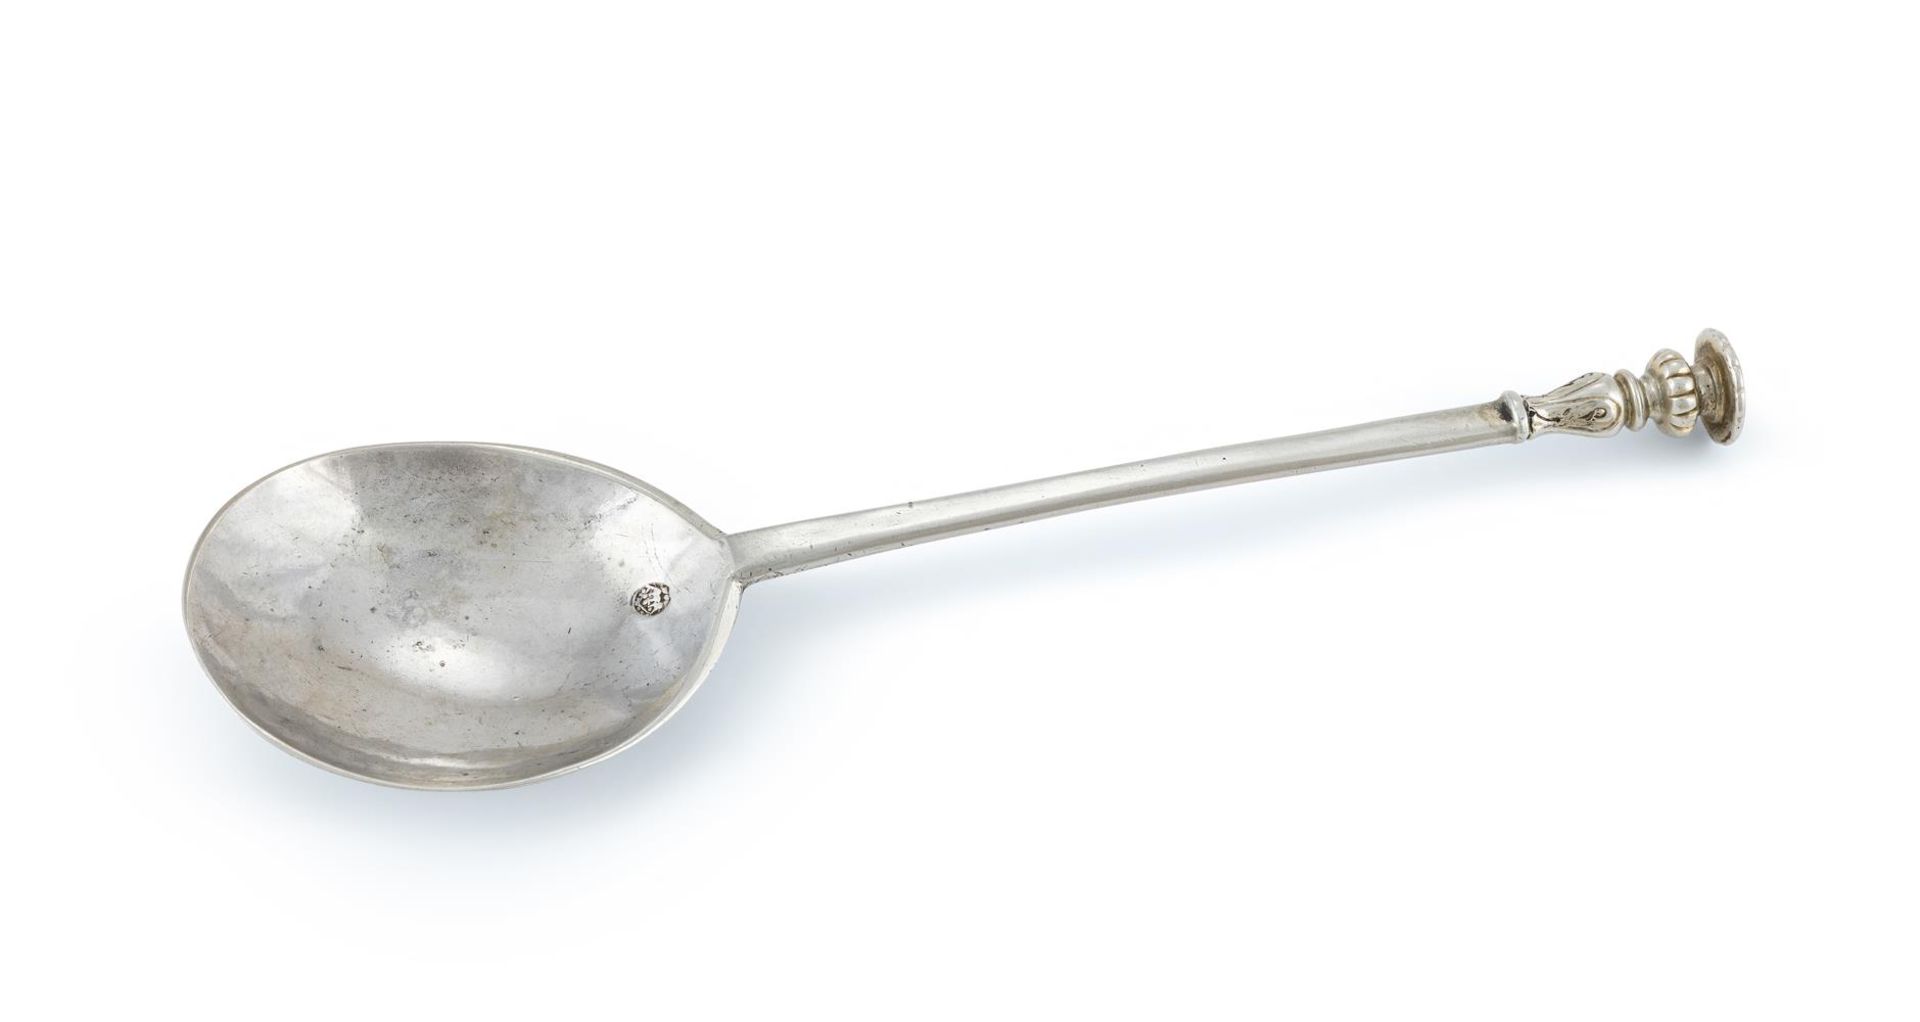 A LATE 16TH/EARLY 17TH CENTURY SPOON